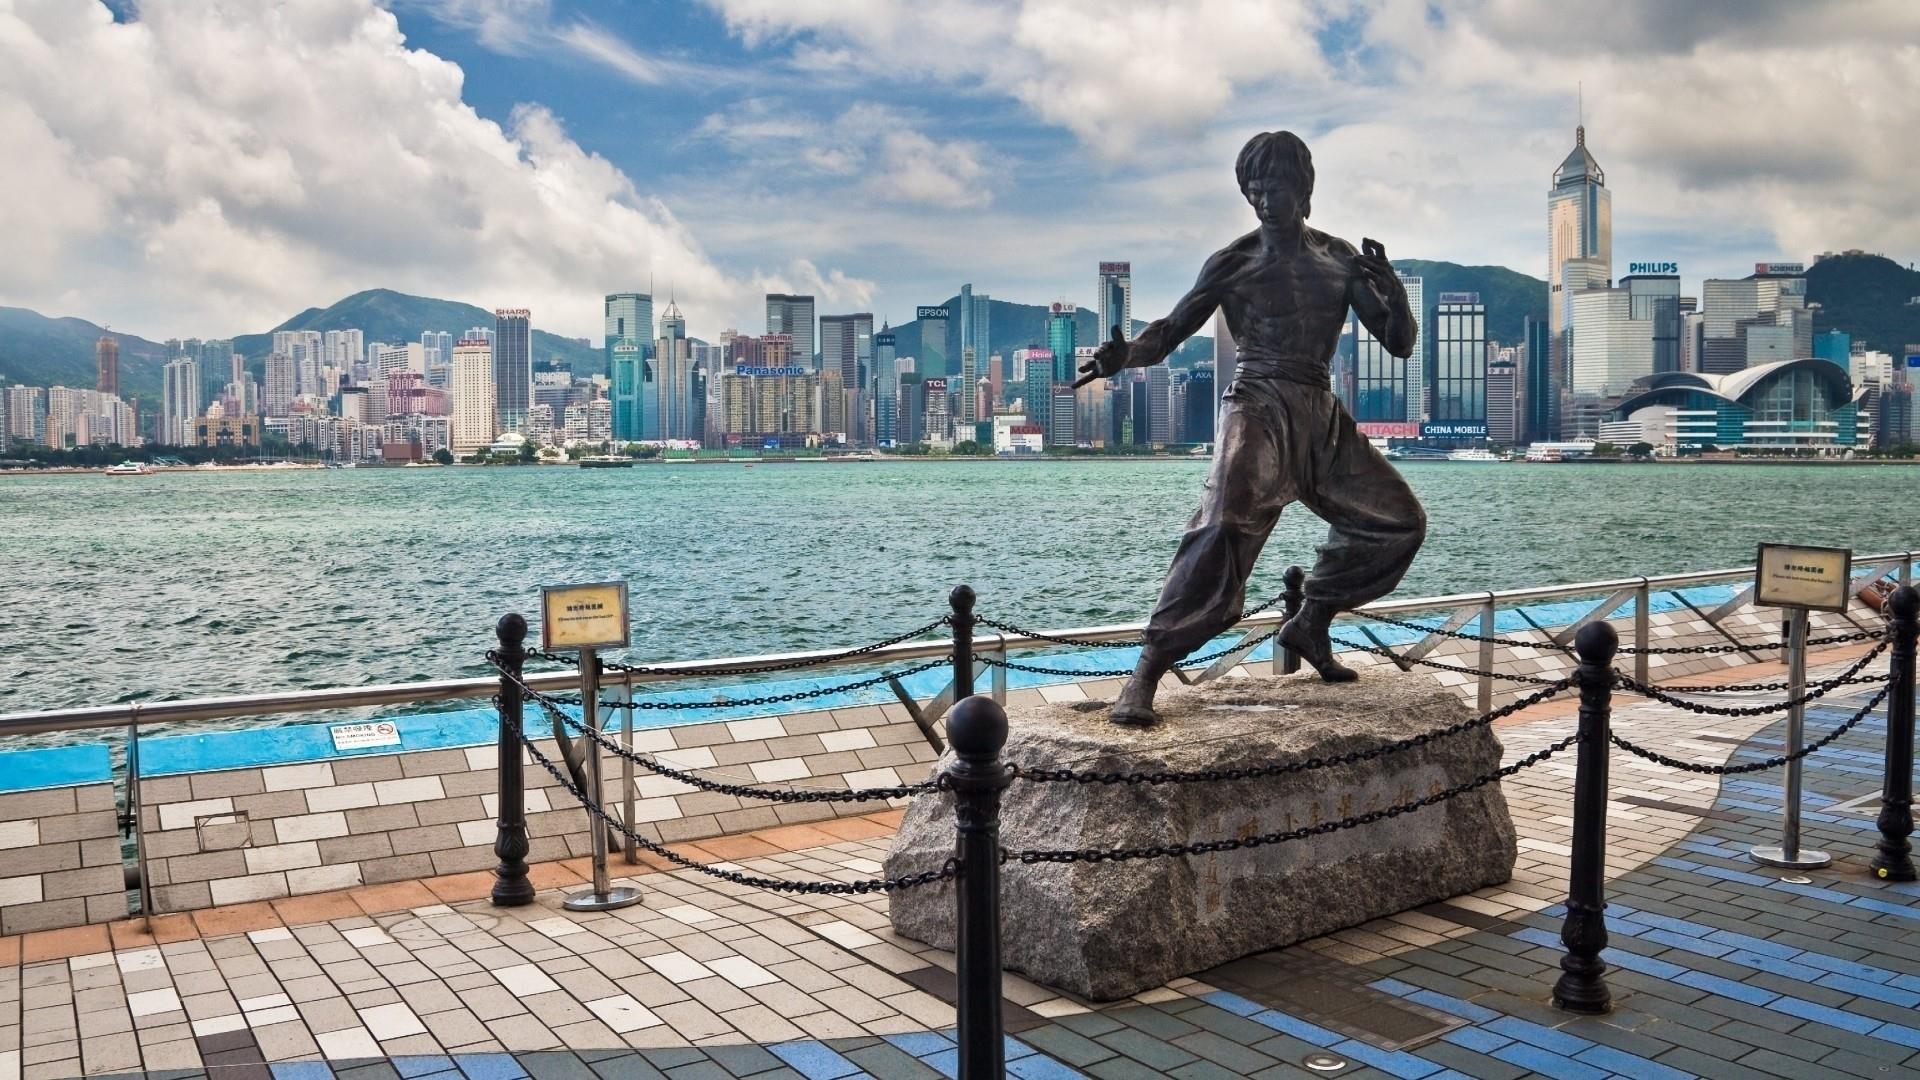 Bruce Lee Statue - Avenue of Stars, Victoria Harbour, Hong Kong - backiee